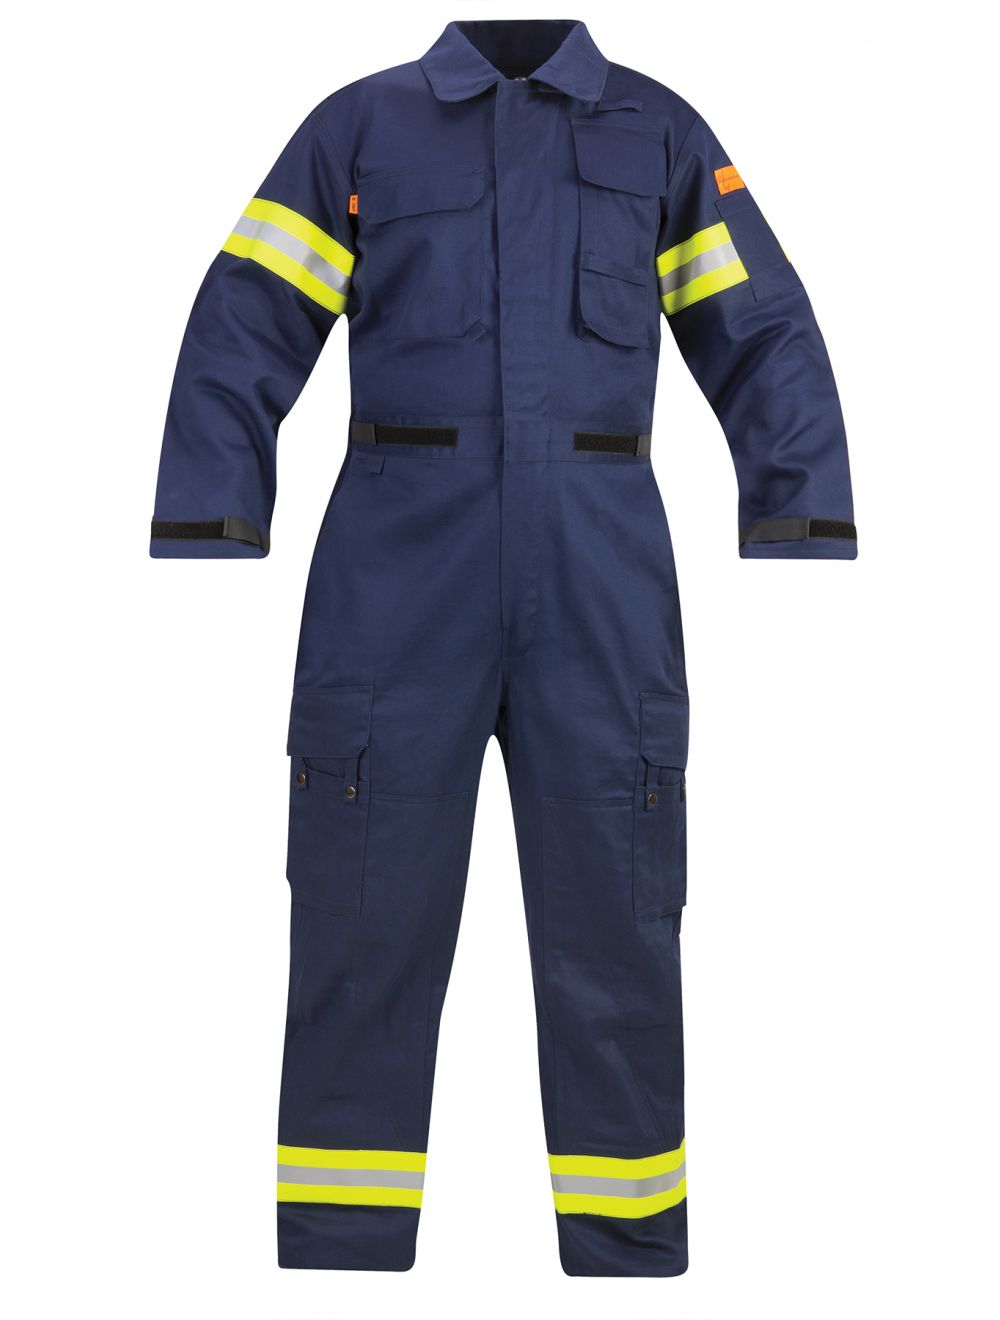 Propper F5141-2X Wildland Firefighter Extrication Suit